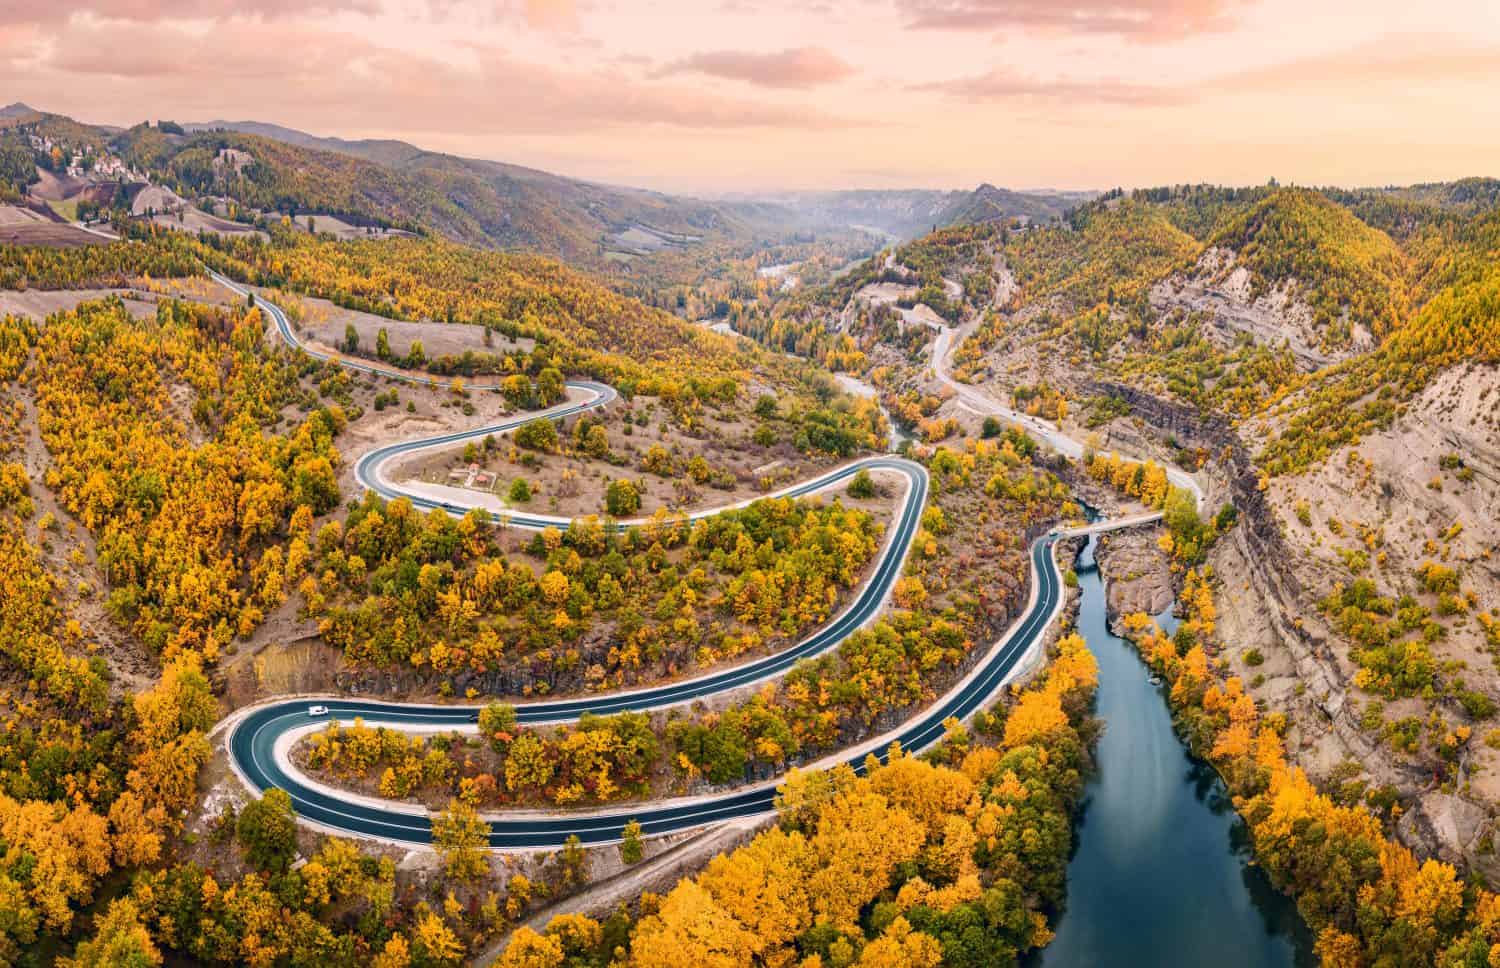 Aerial panoramic view of Venetikos river and serpentine highway road in autumn forest in Balkan Greece. Natural park and transport infrastructure